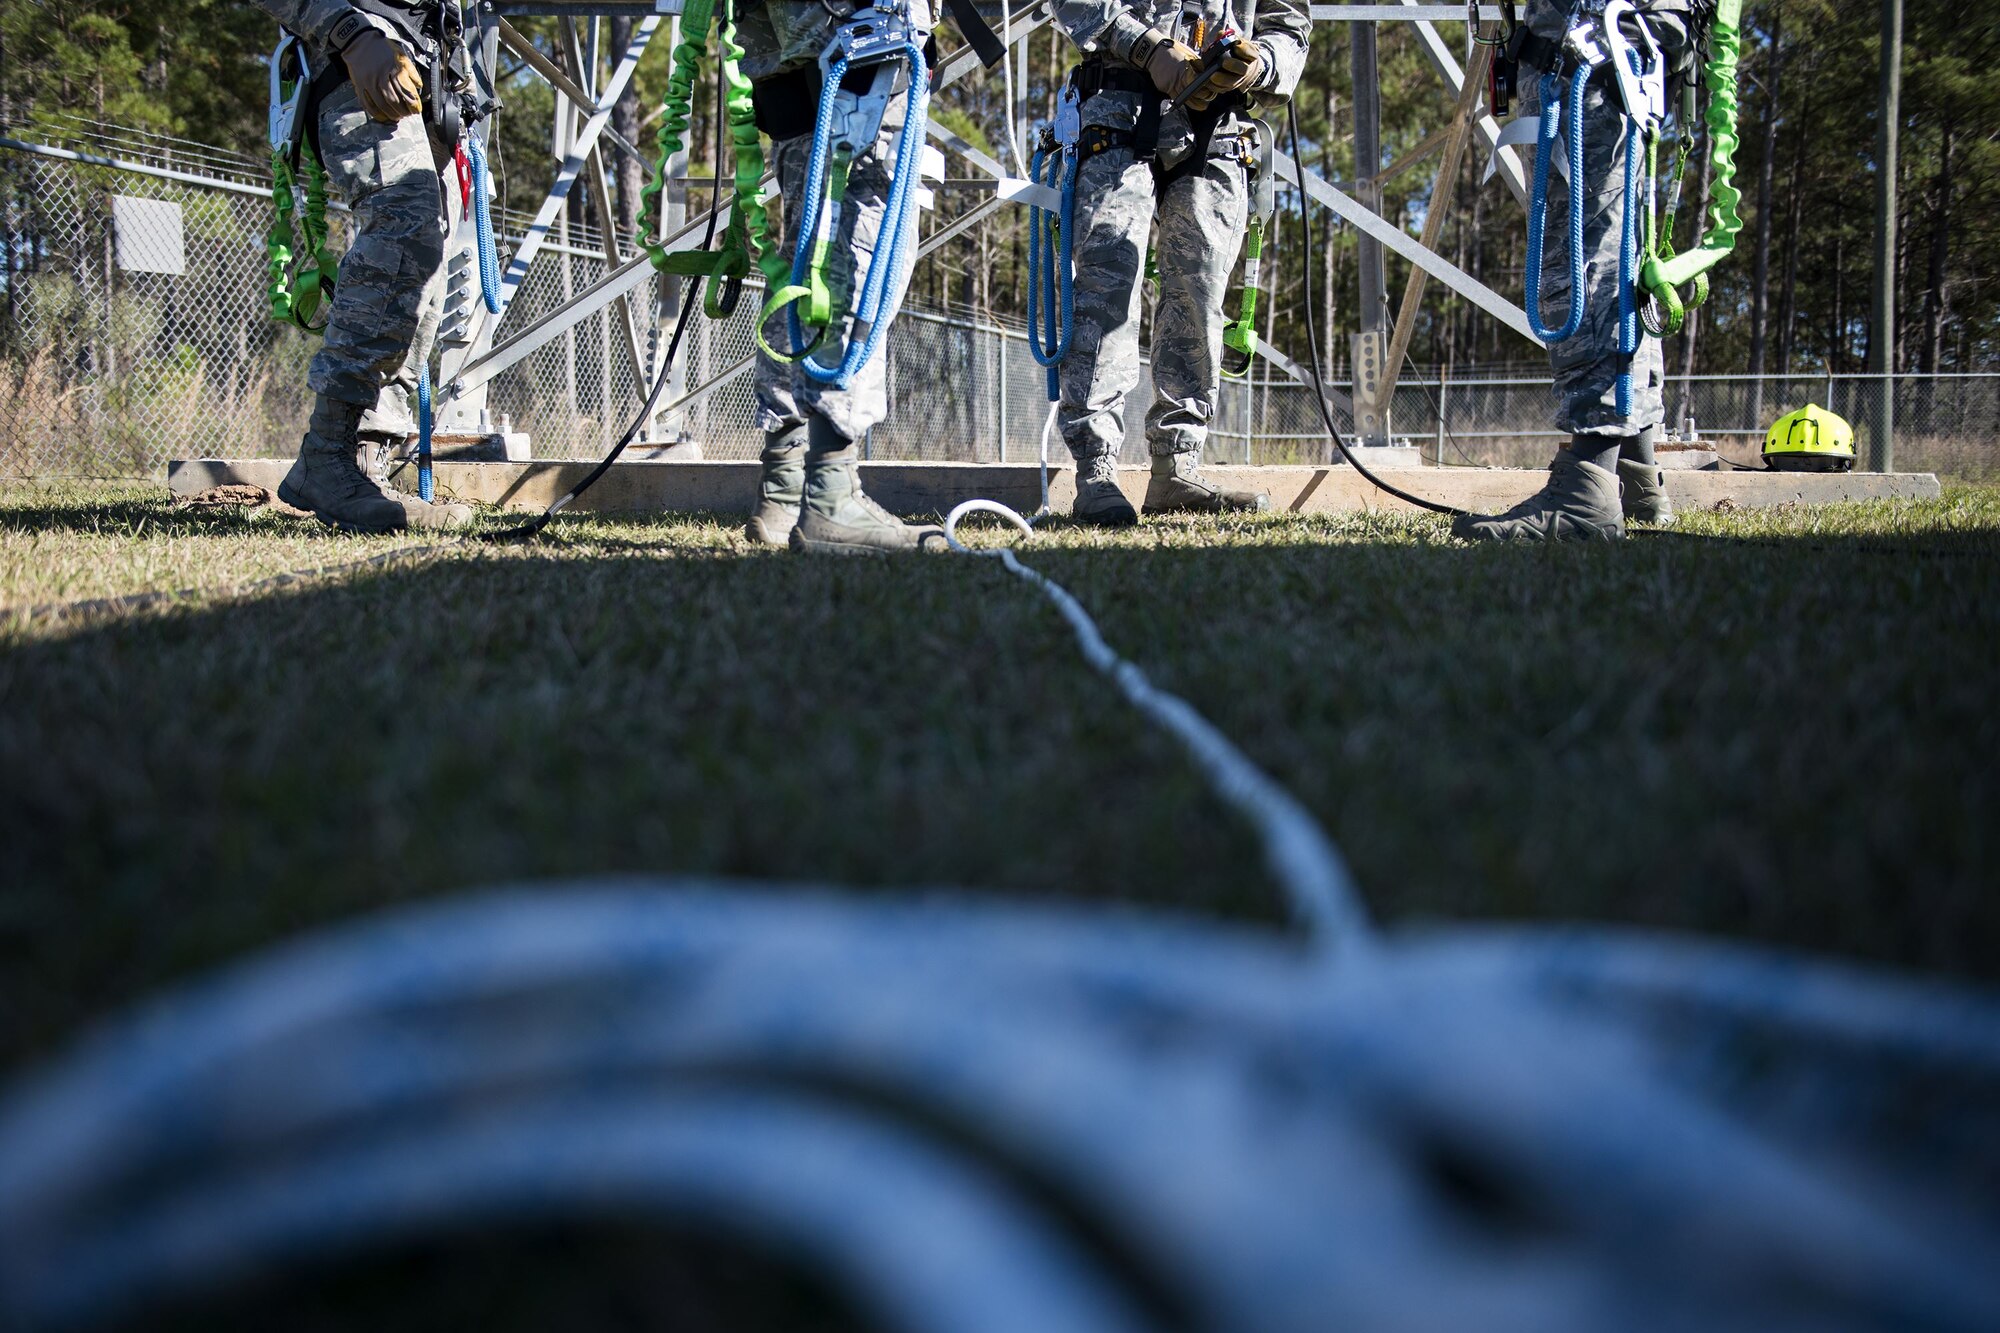 Team Moody Airmen get ready to climb a radio antenna tower during an immersion tour, Dec. 11, 2017, at Moody Air Force Base, Ga. Moody leadership visited the radar, airfield and weather systems facility to familiarize themselves with the 23d Operations Support Squadron’s duties and to gain a better understanding of how they impact the mission. (U.S. Air Force photo by Airman 1st Class Erick Requadt)